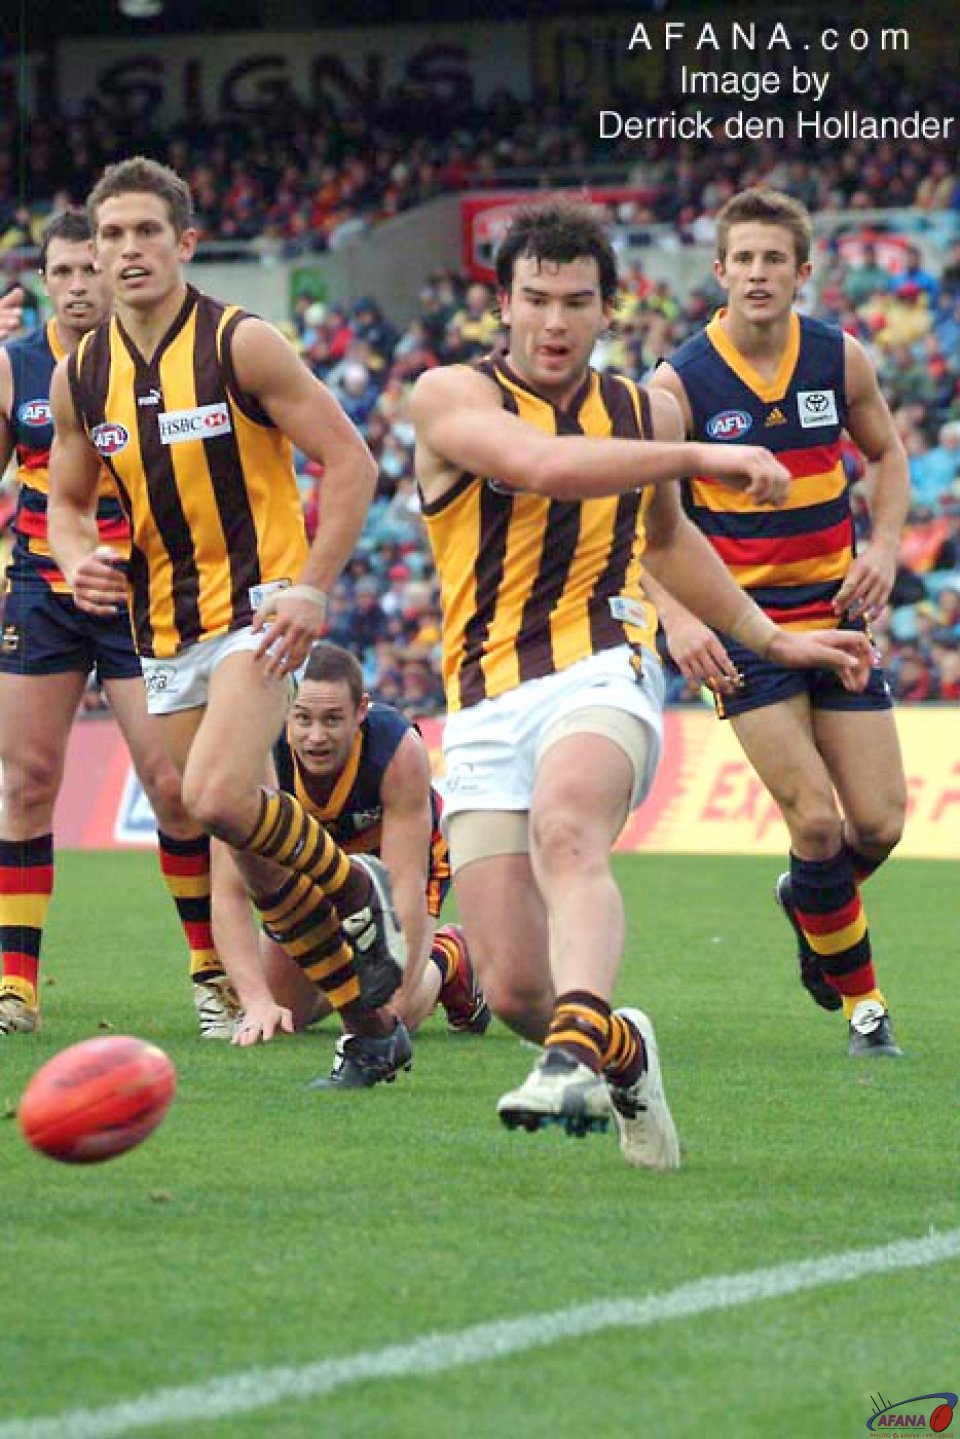 [b]Hawthorn clears along the boundary line from defence against the Crows[/b]